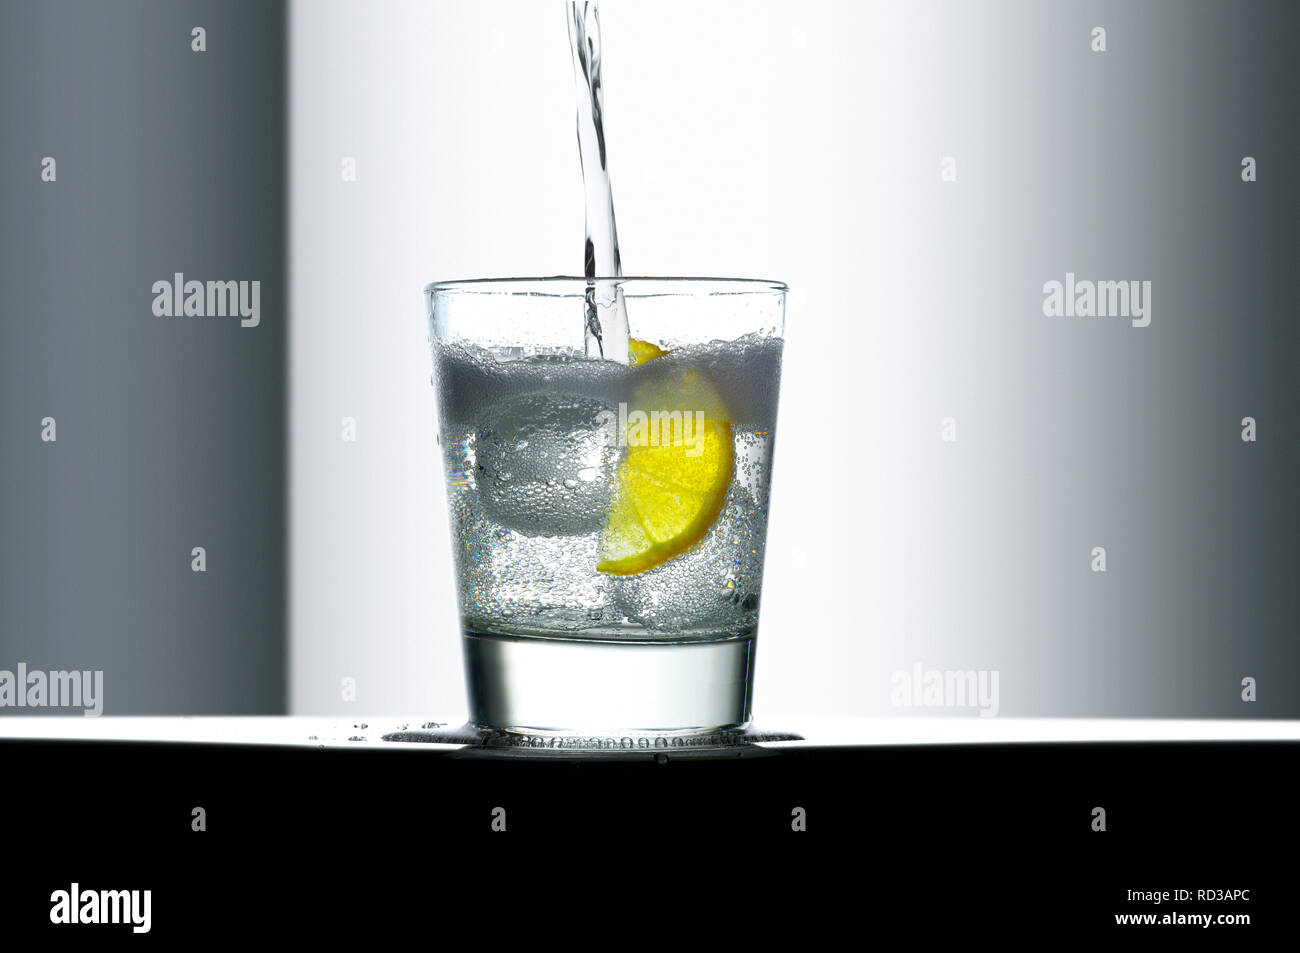 Fizzy liquid pouring into a glass of ice and lemon Stock Photo